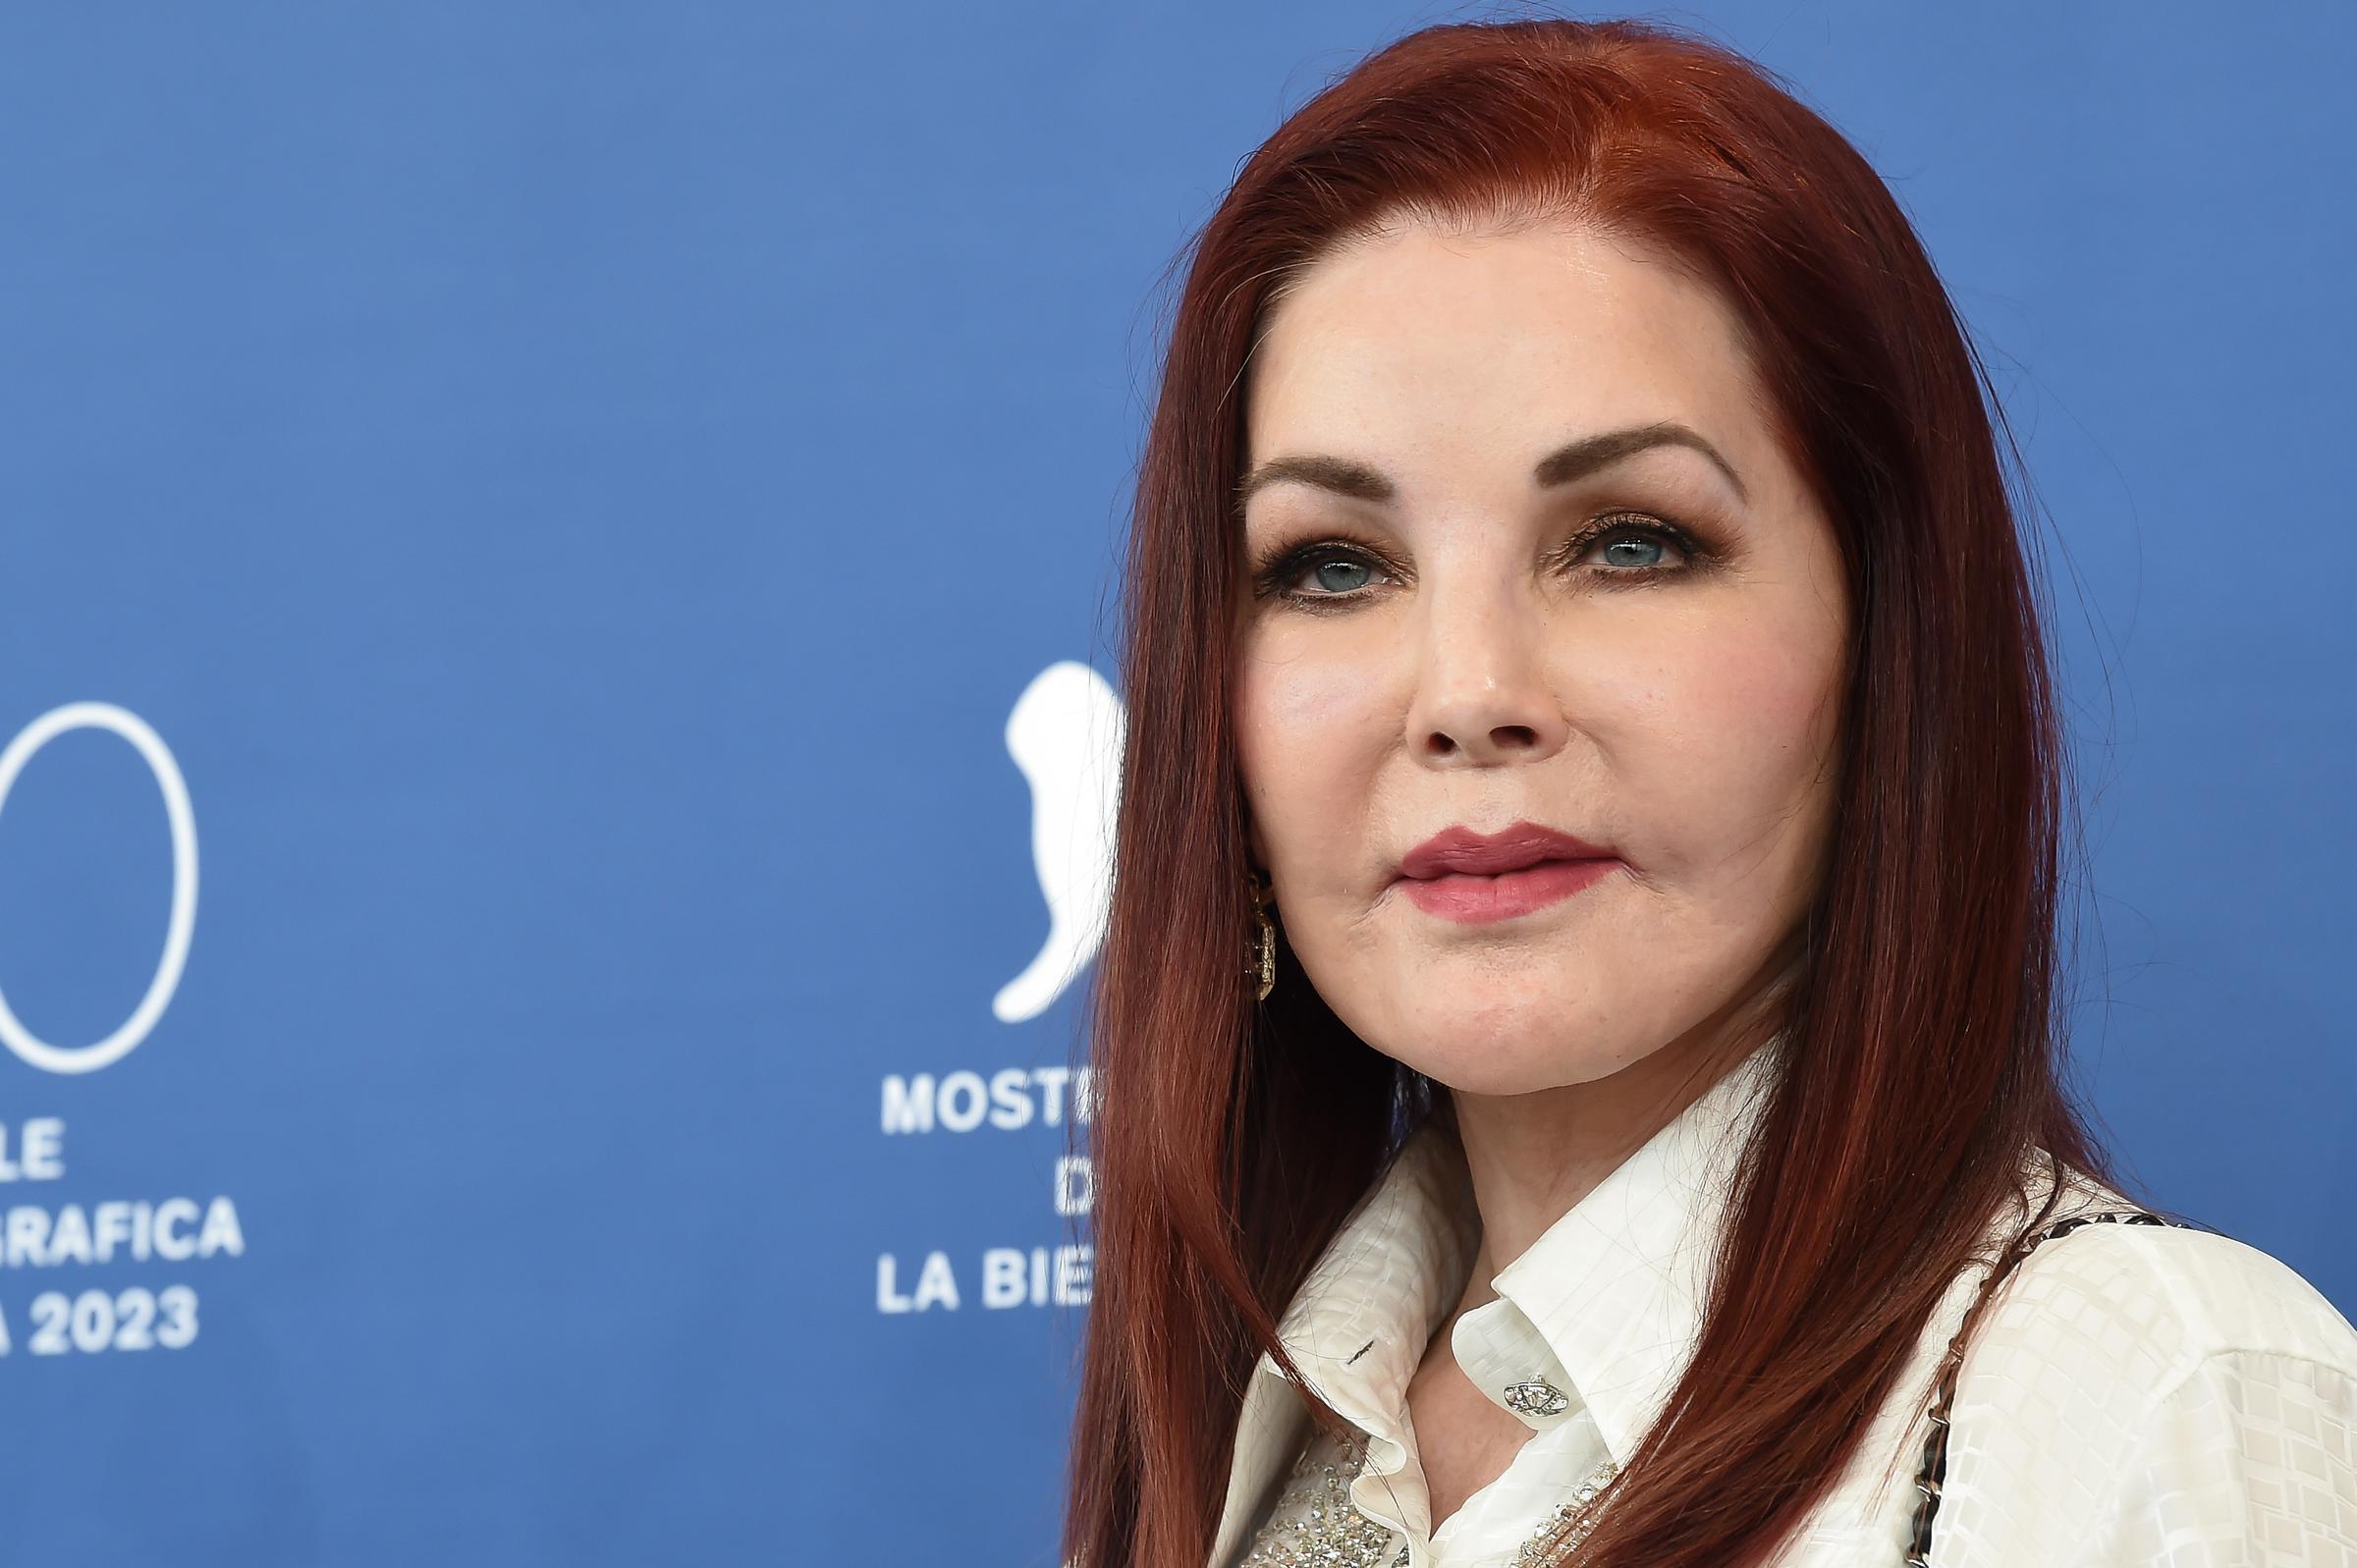 Priscilla Presley at the 80th Venice International Film Festival on September 4, 2023, in Venice, Italy. | Source: Getty Images